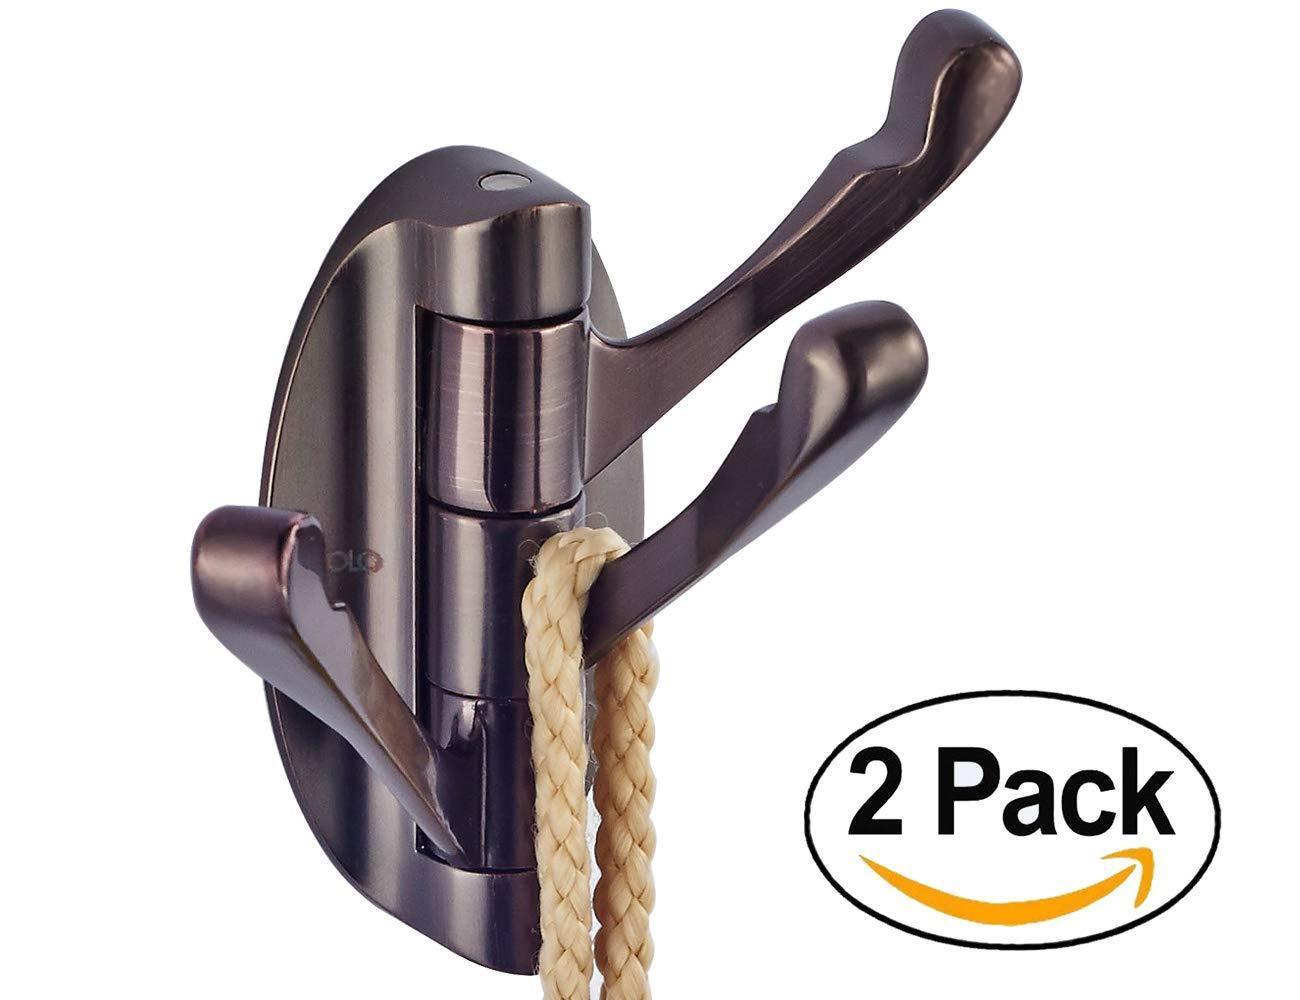 XOGOLO Swivel Hook 2 Pack for Heavy Duty Folding Swing Arm Triple Coat Hook with Multi Three Foldable Arms Towel/Clothes Hanger for Bathroom Kitchen Garage Wall Mount, Oil Rubbed Bronze